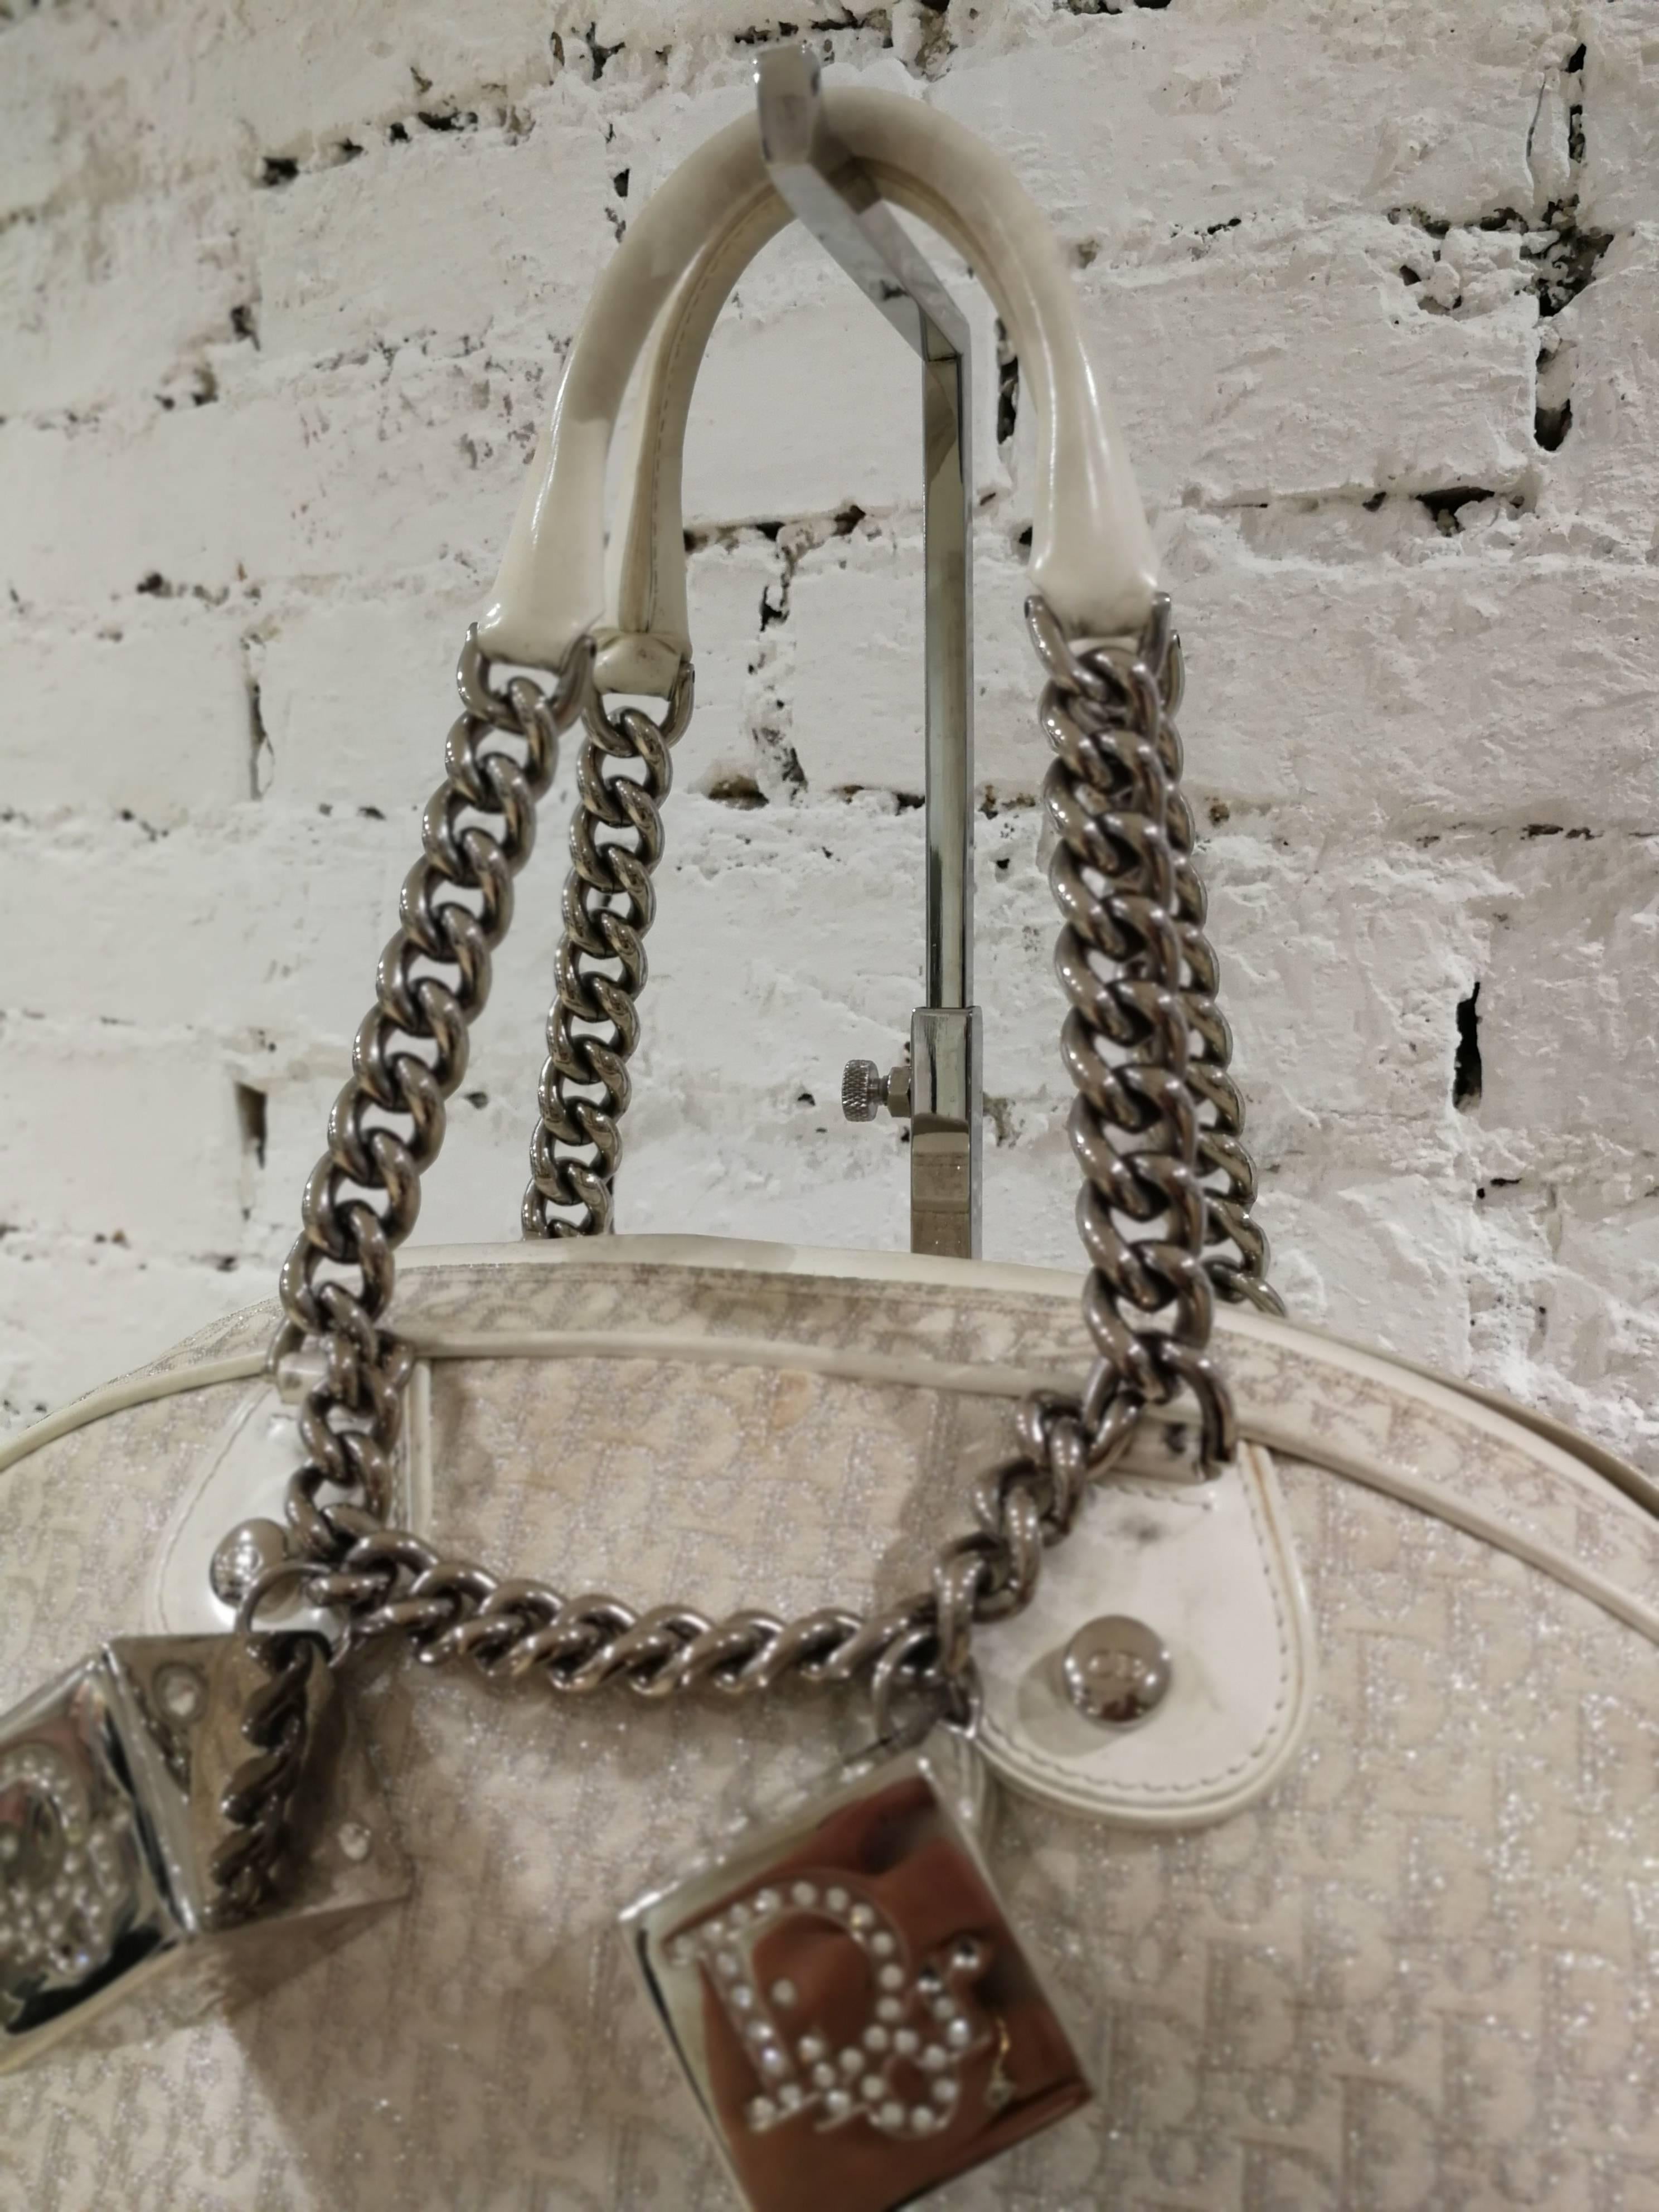 Christian Dior Gambler White and silver Monogram bag embellished with silver tone cubes missing sone of the crystal swarovski. Cream and silver metallic monogram canvas handle bag with silver-tone crystal embellished logo die hardware.
Measurements: